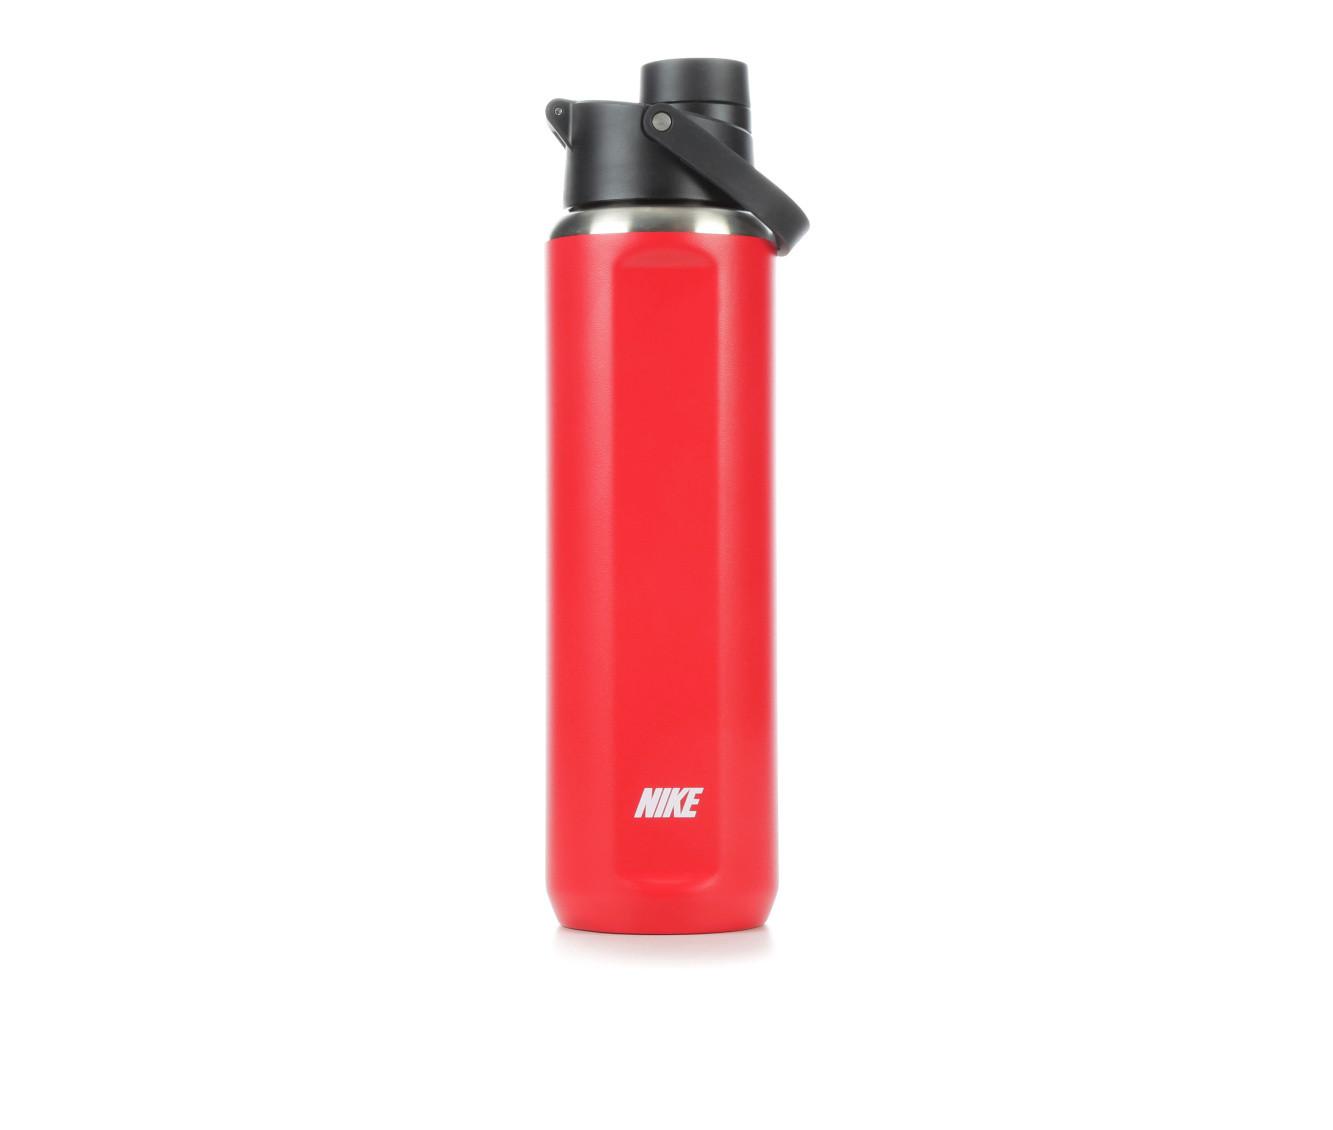 Nike Recharge Stainless Steel Straw Bottle (24 oz)